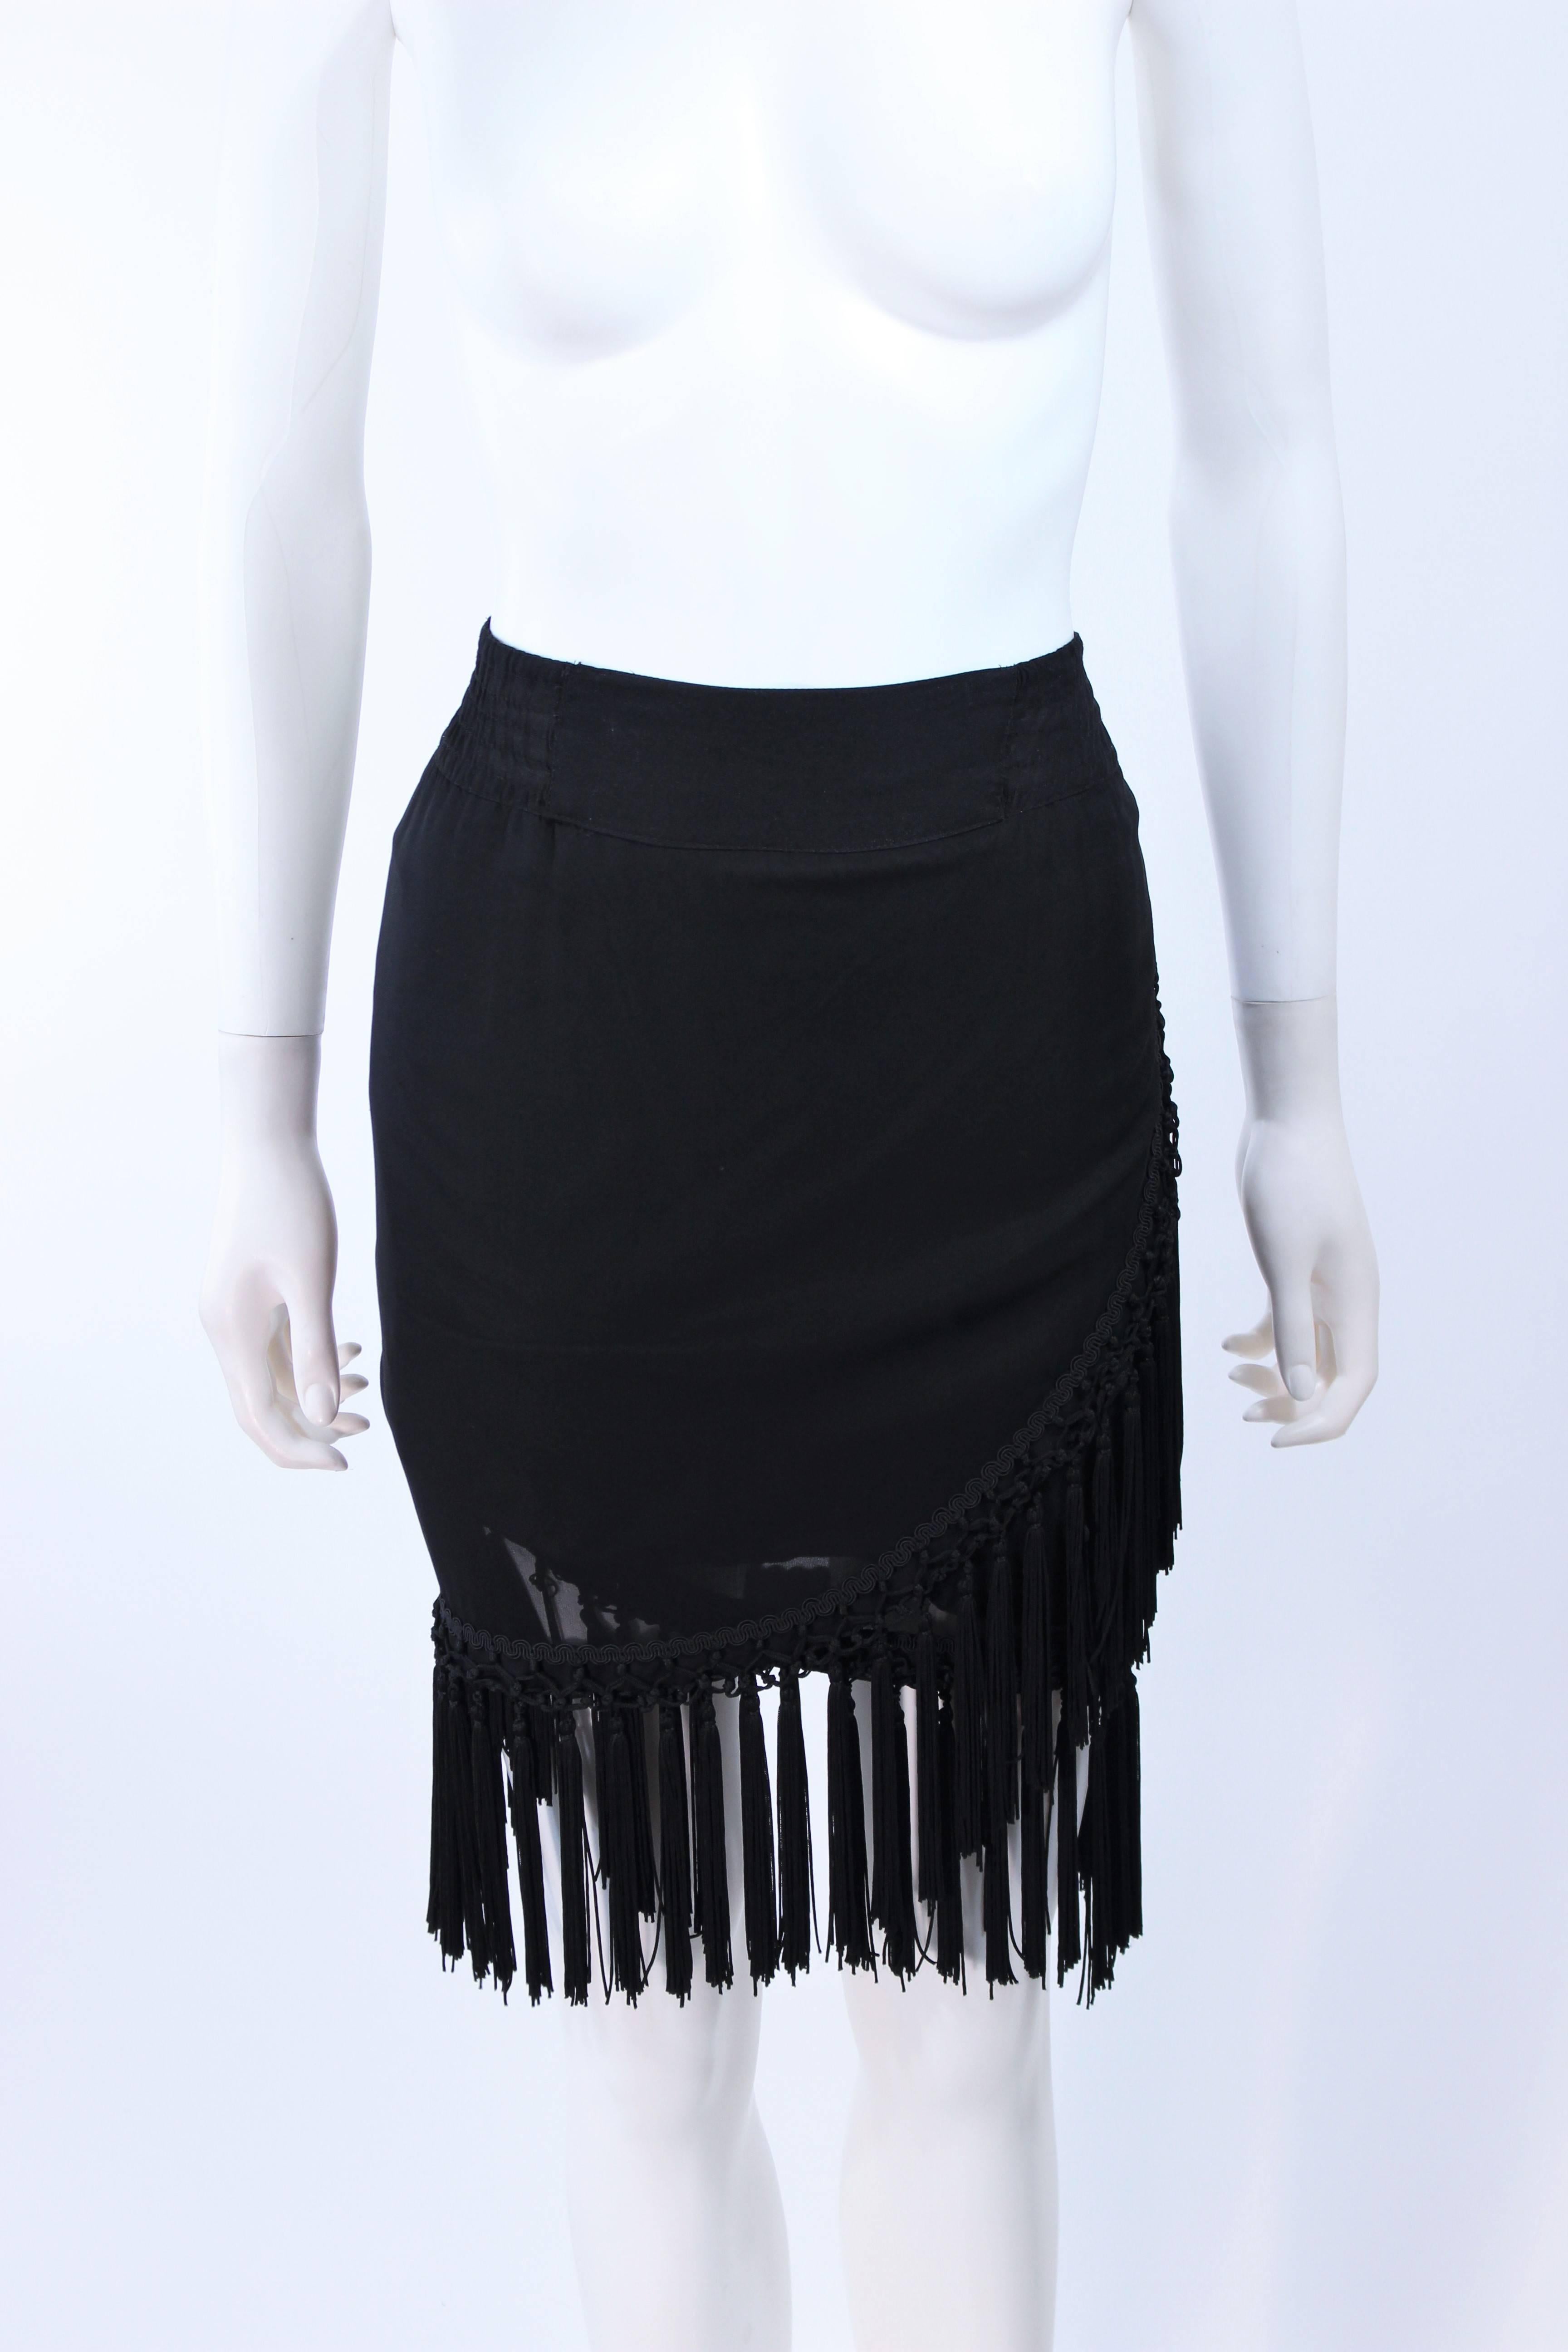 This Diane Frez design is composed of a black silk chiffon and features a tassel trim. Wrap style with elastic waist. In excellent vintage condition.

**Please cross-reference measurements for personal accuracy. Size in description box is an